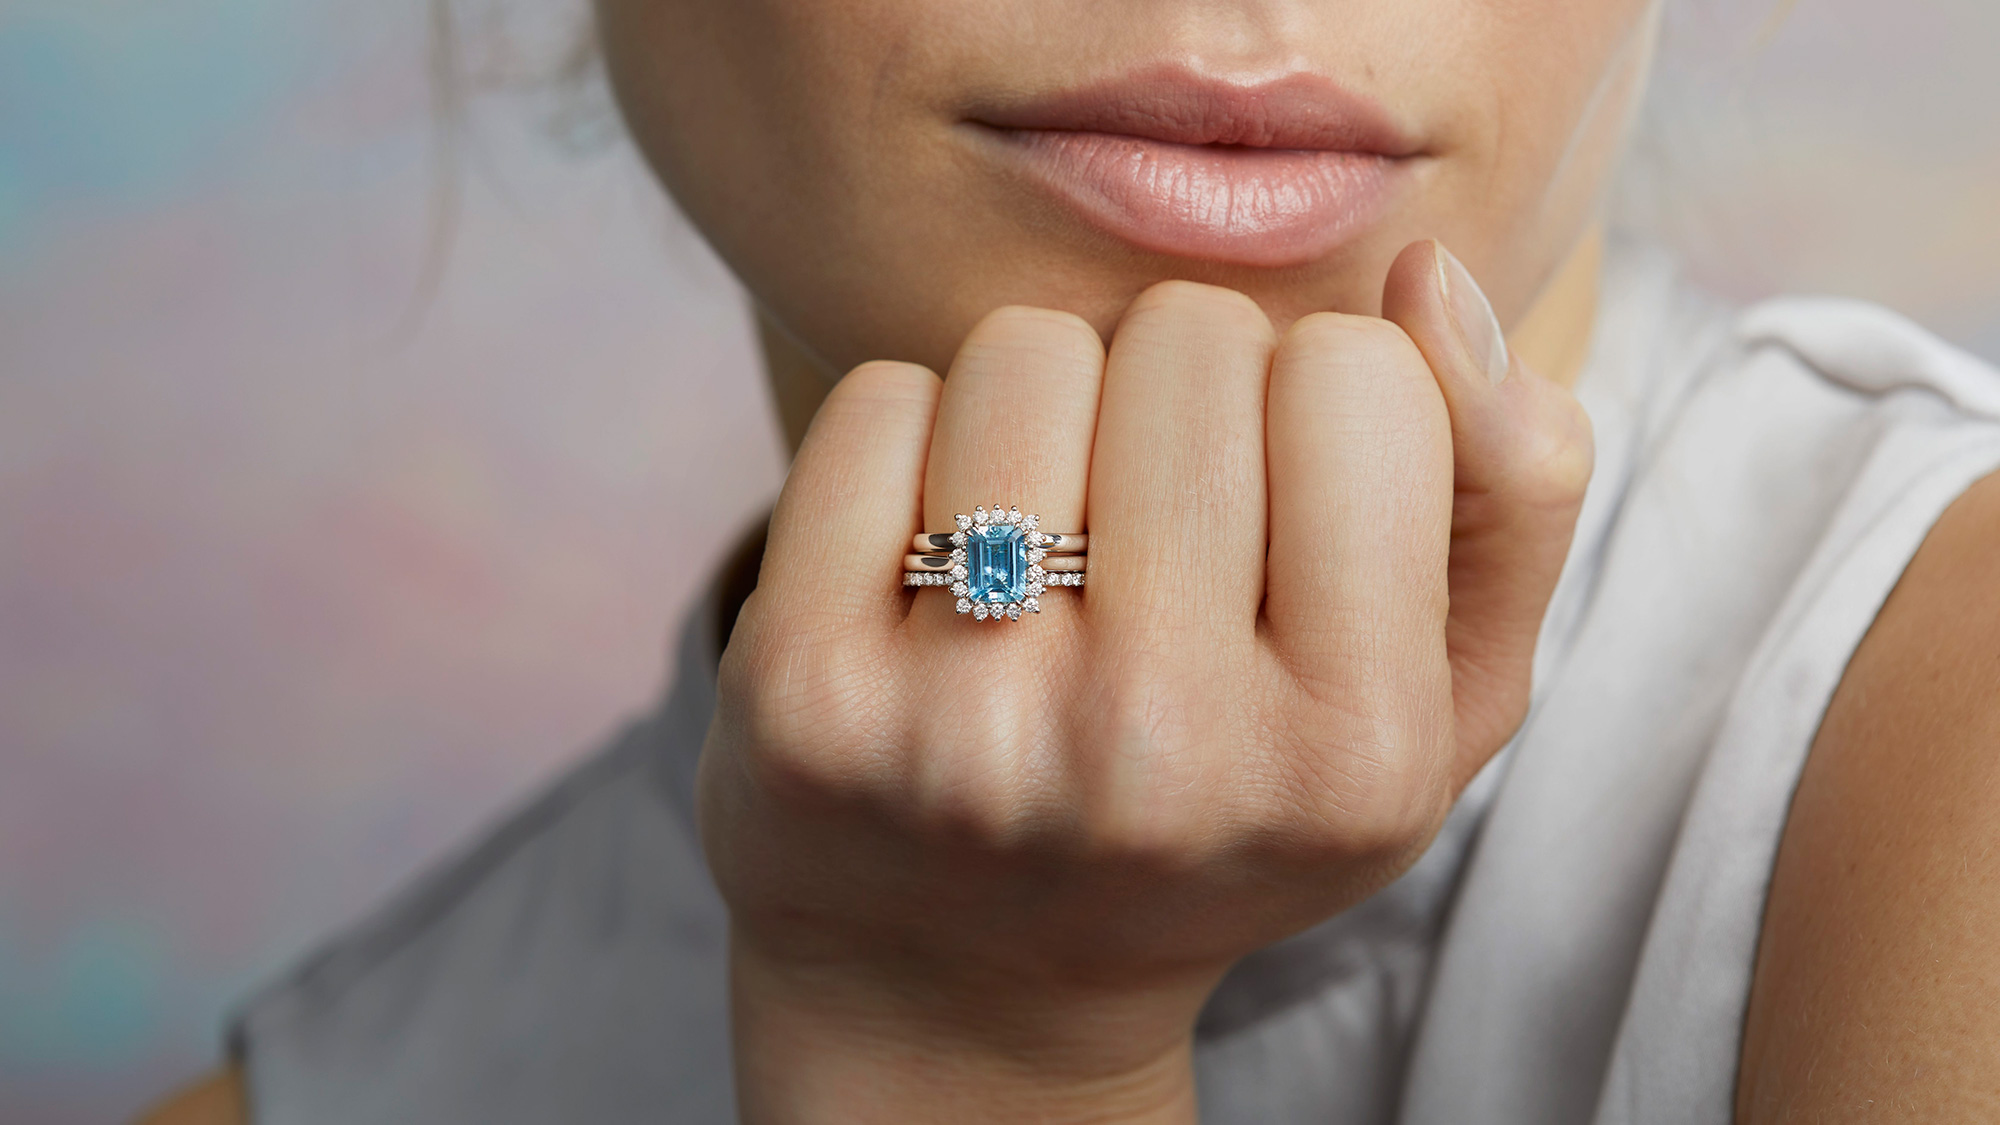 These are the biggest engagement ring trends for 2021